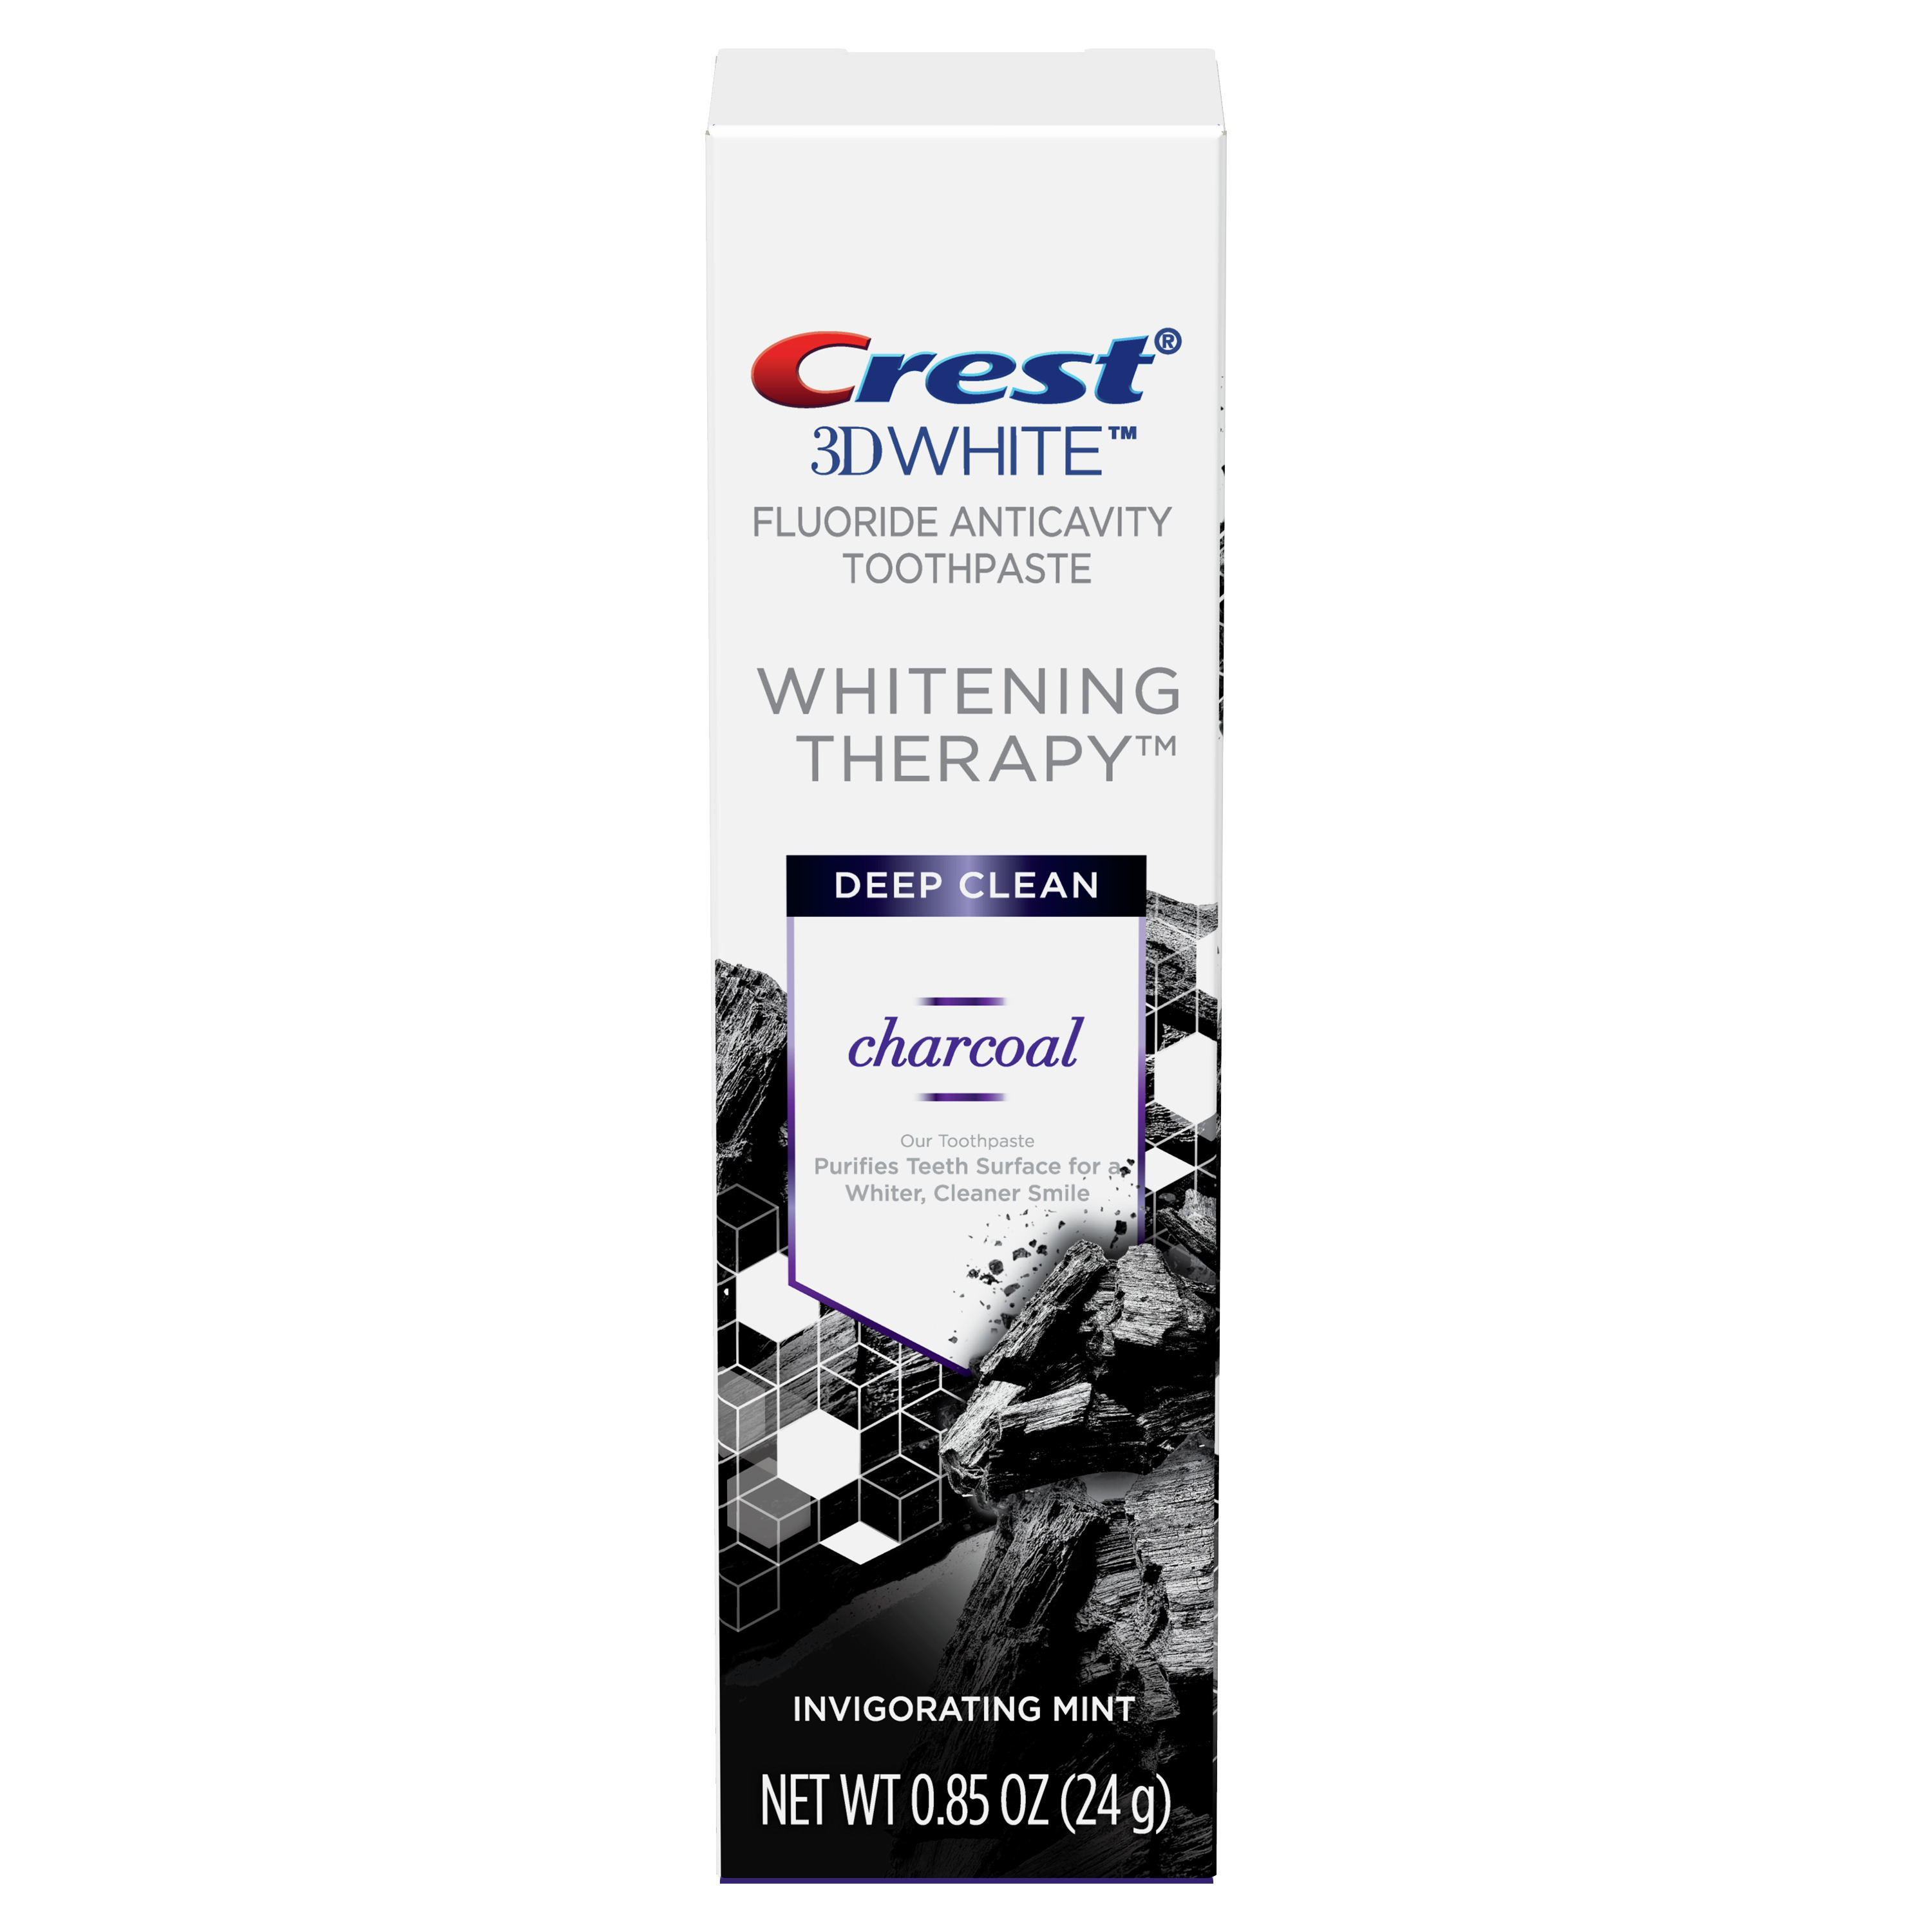 Crest 3D White Whitening Therapy Charcoal Deep Clean Fluoride Toothpaste, Invigorating Mint, .85 oz - image 1 of 7